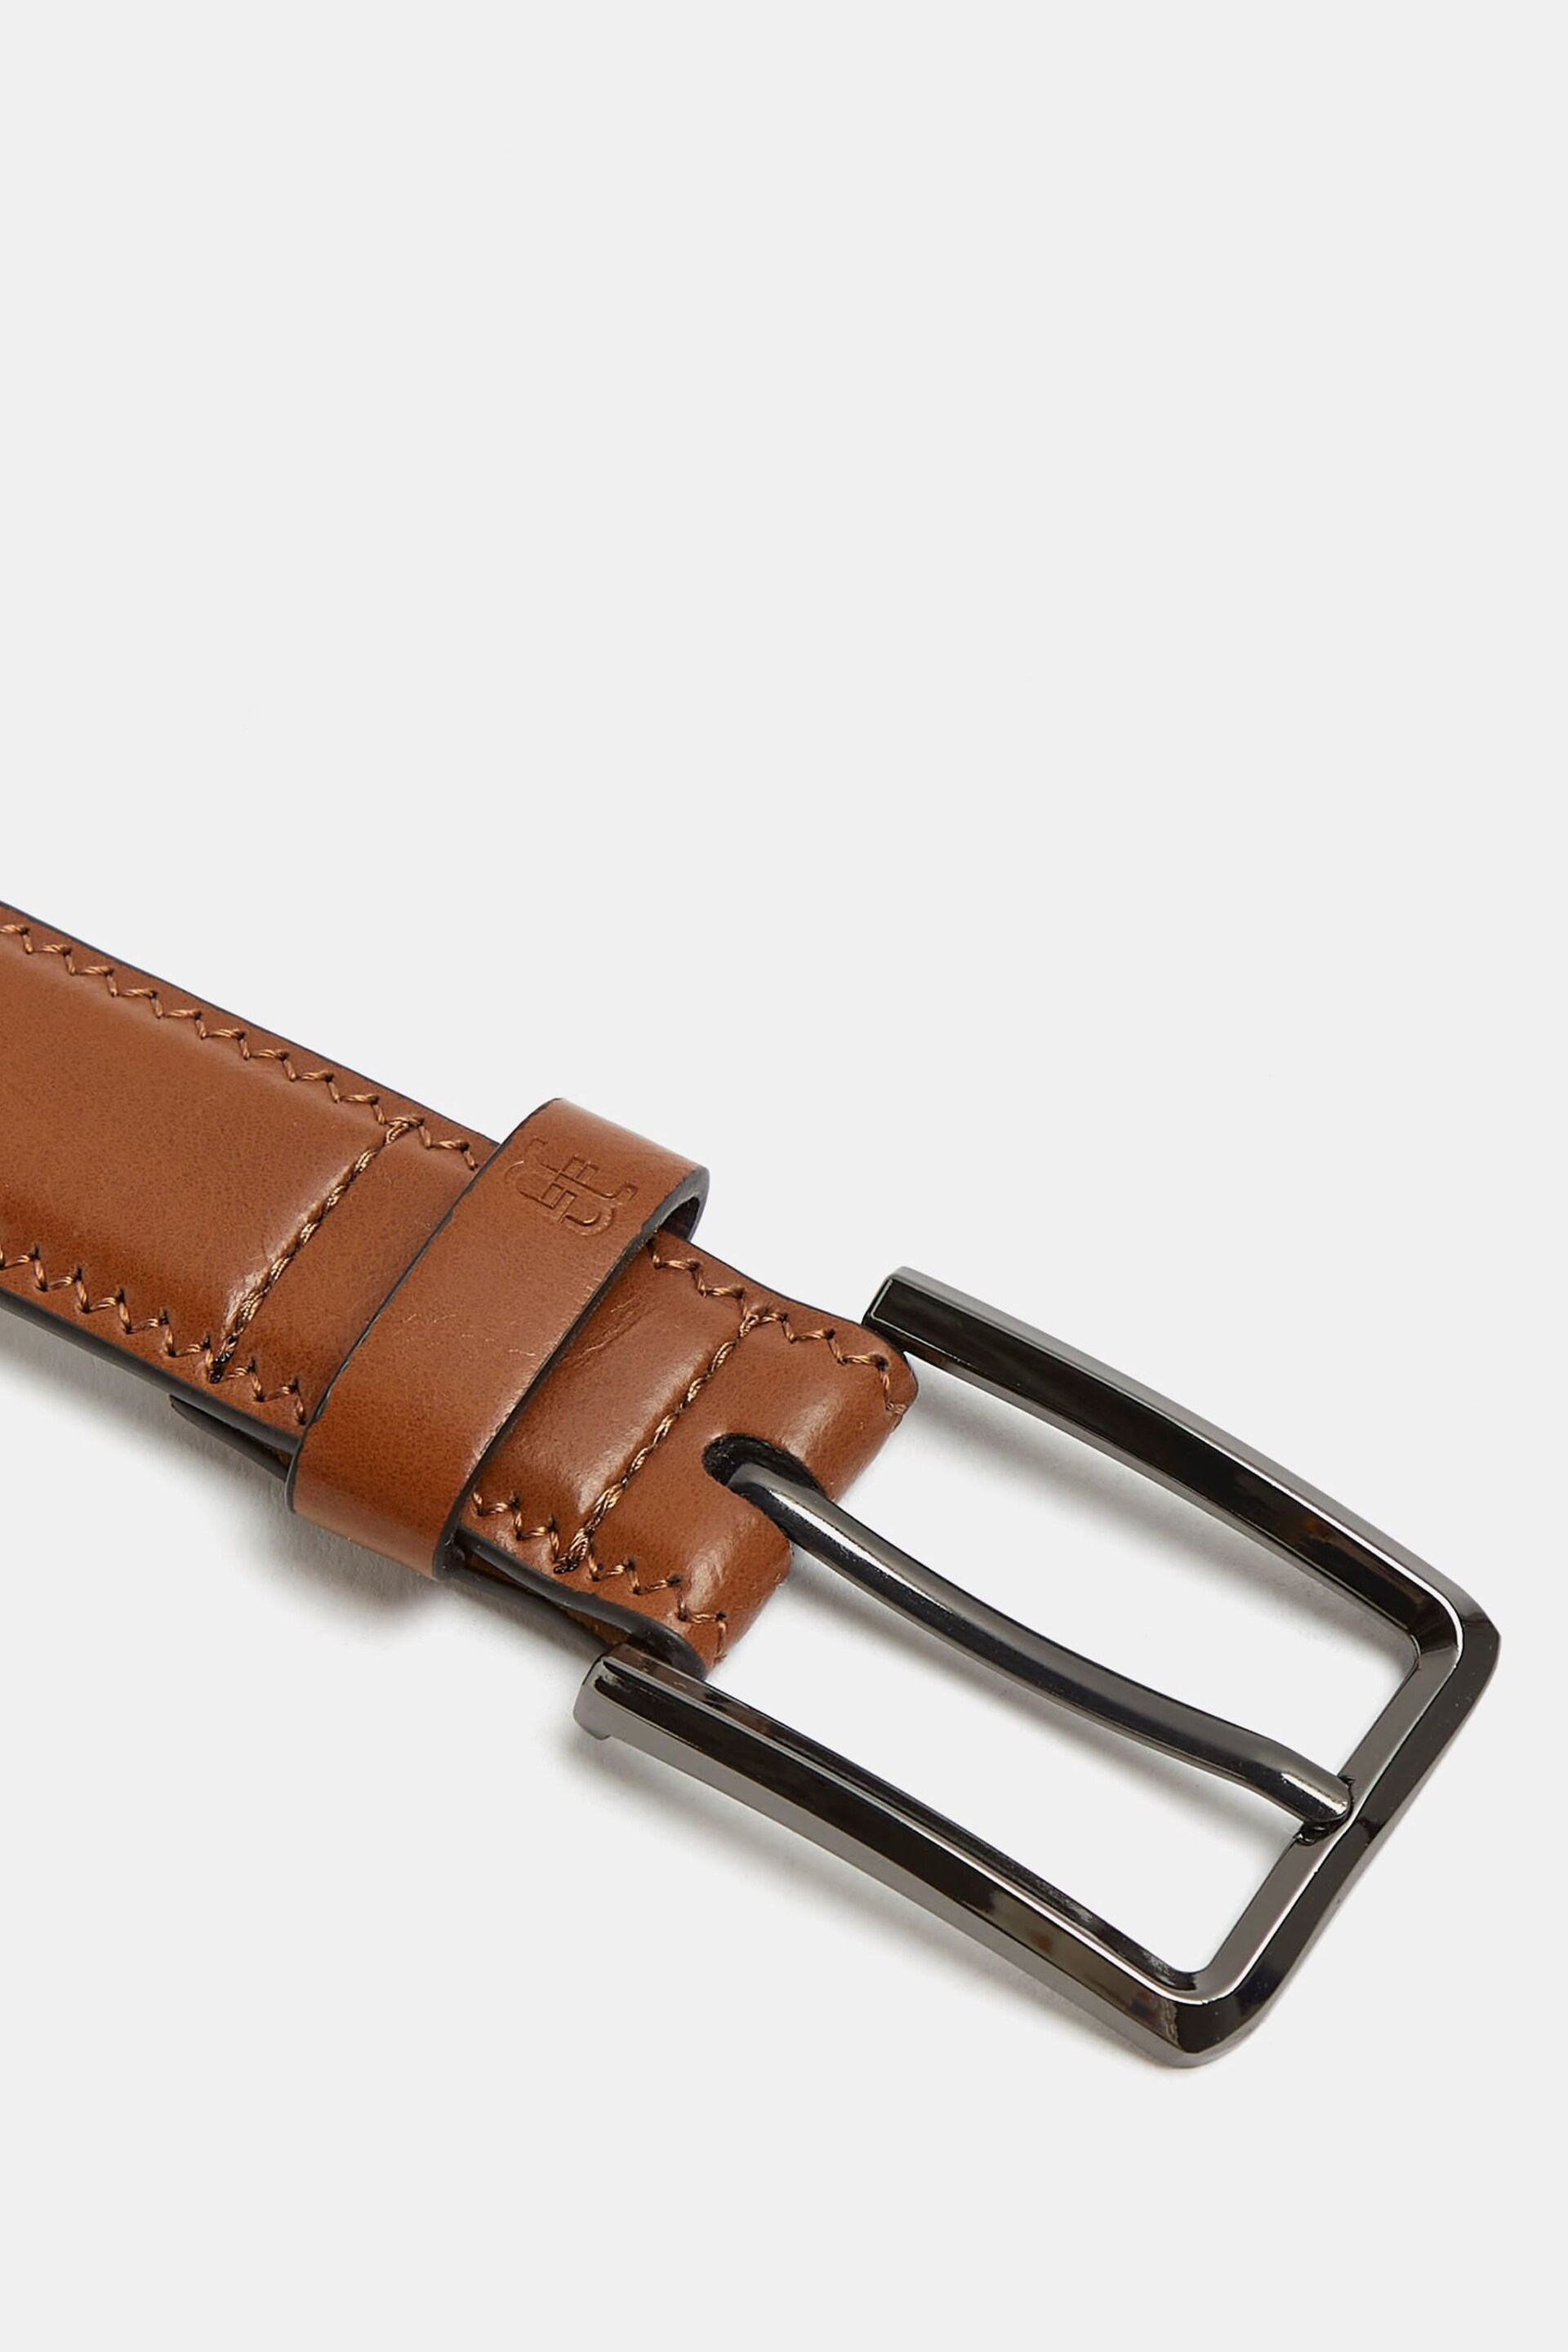 River Island Brown Light River Island Smooth Buckle Brown Belt - Image 2 of 2